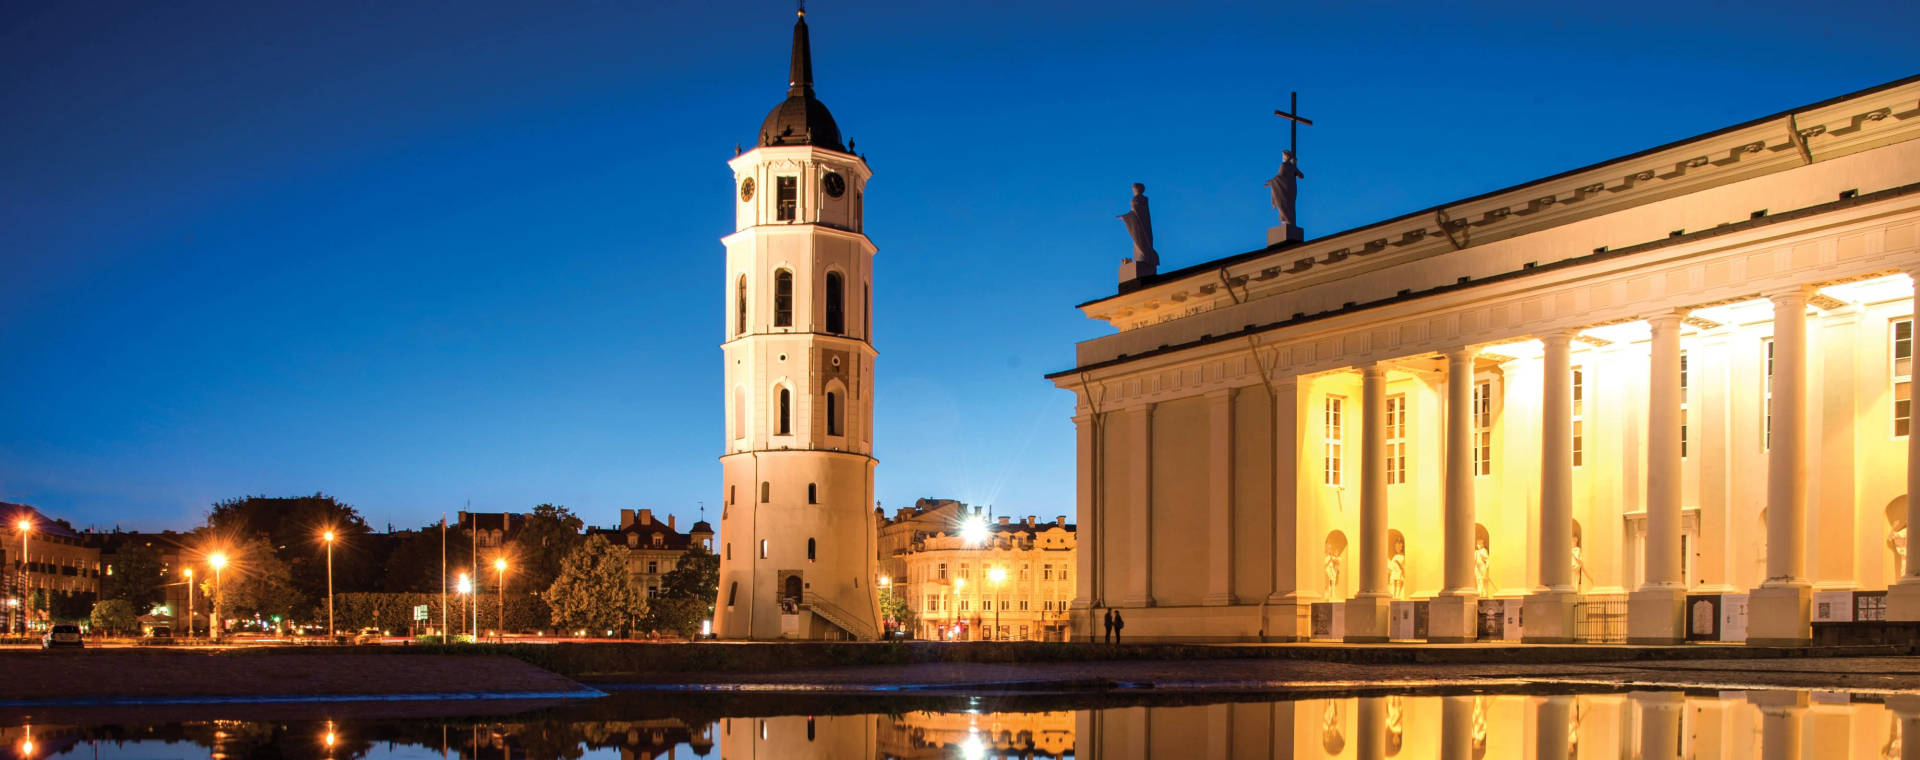 Caption: Stunning View Of Vilnius Cathedral Square At Dusk